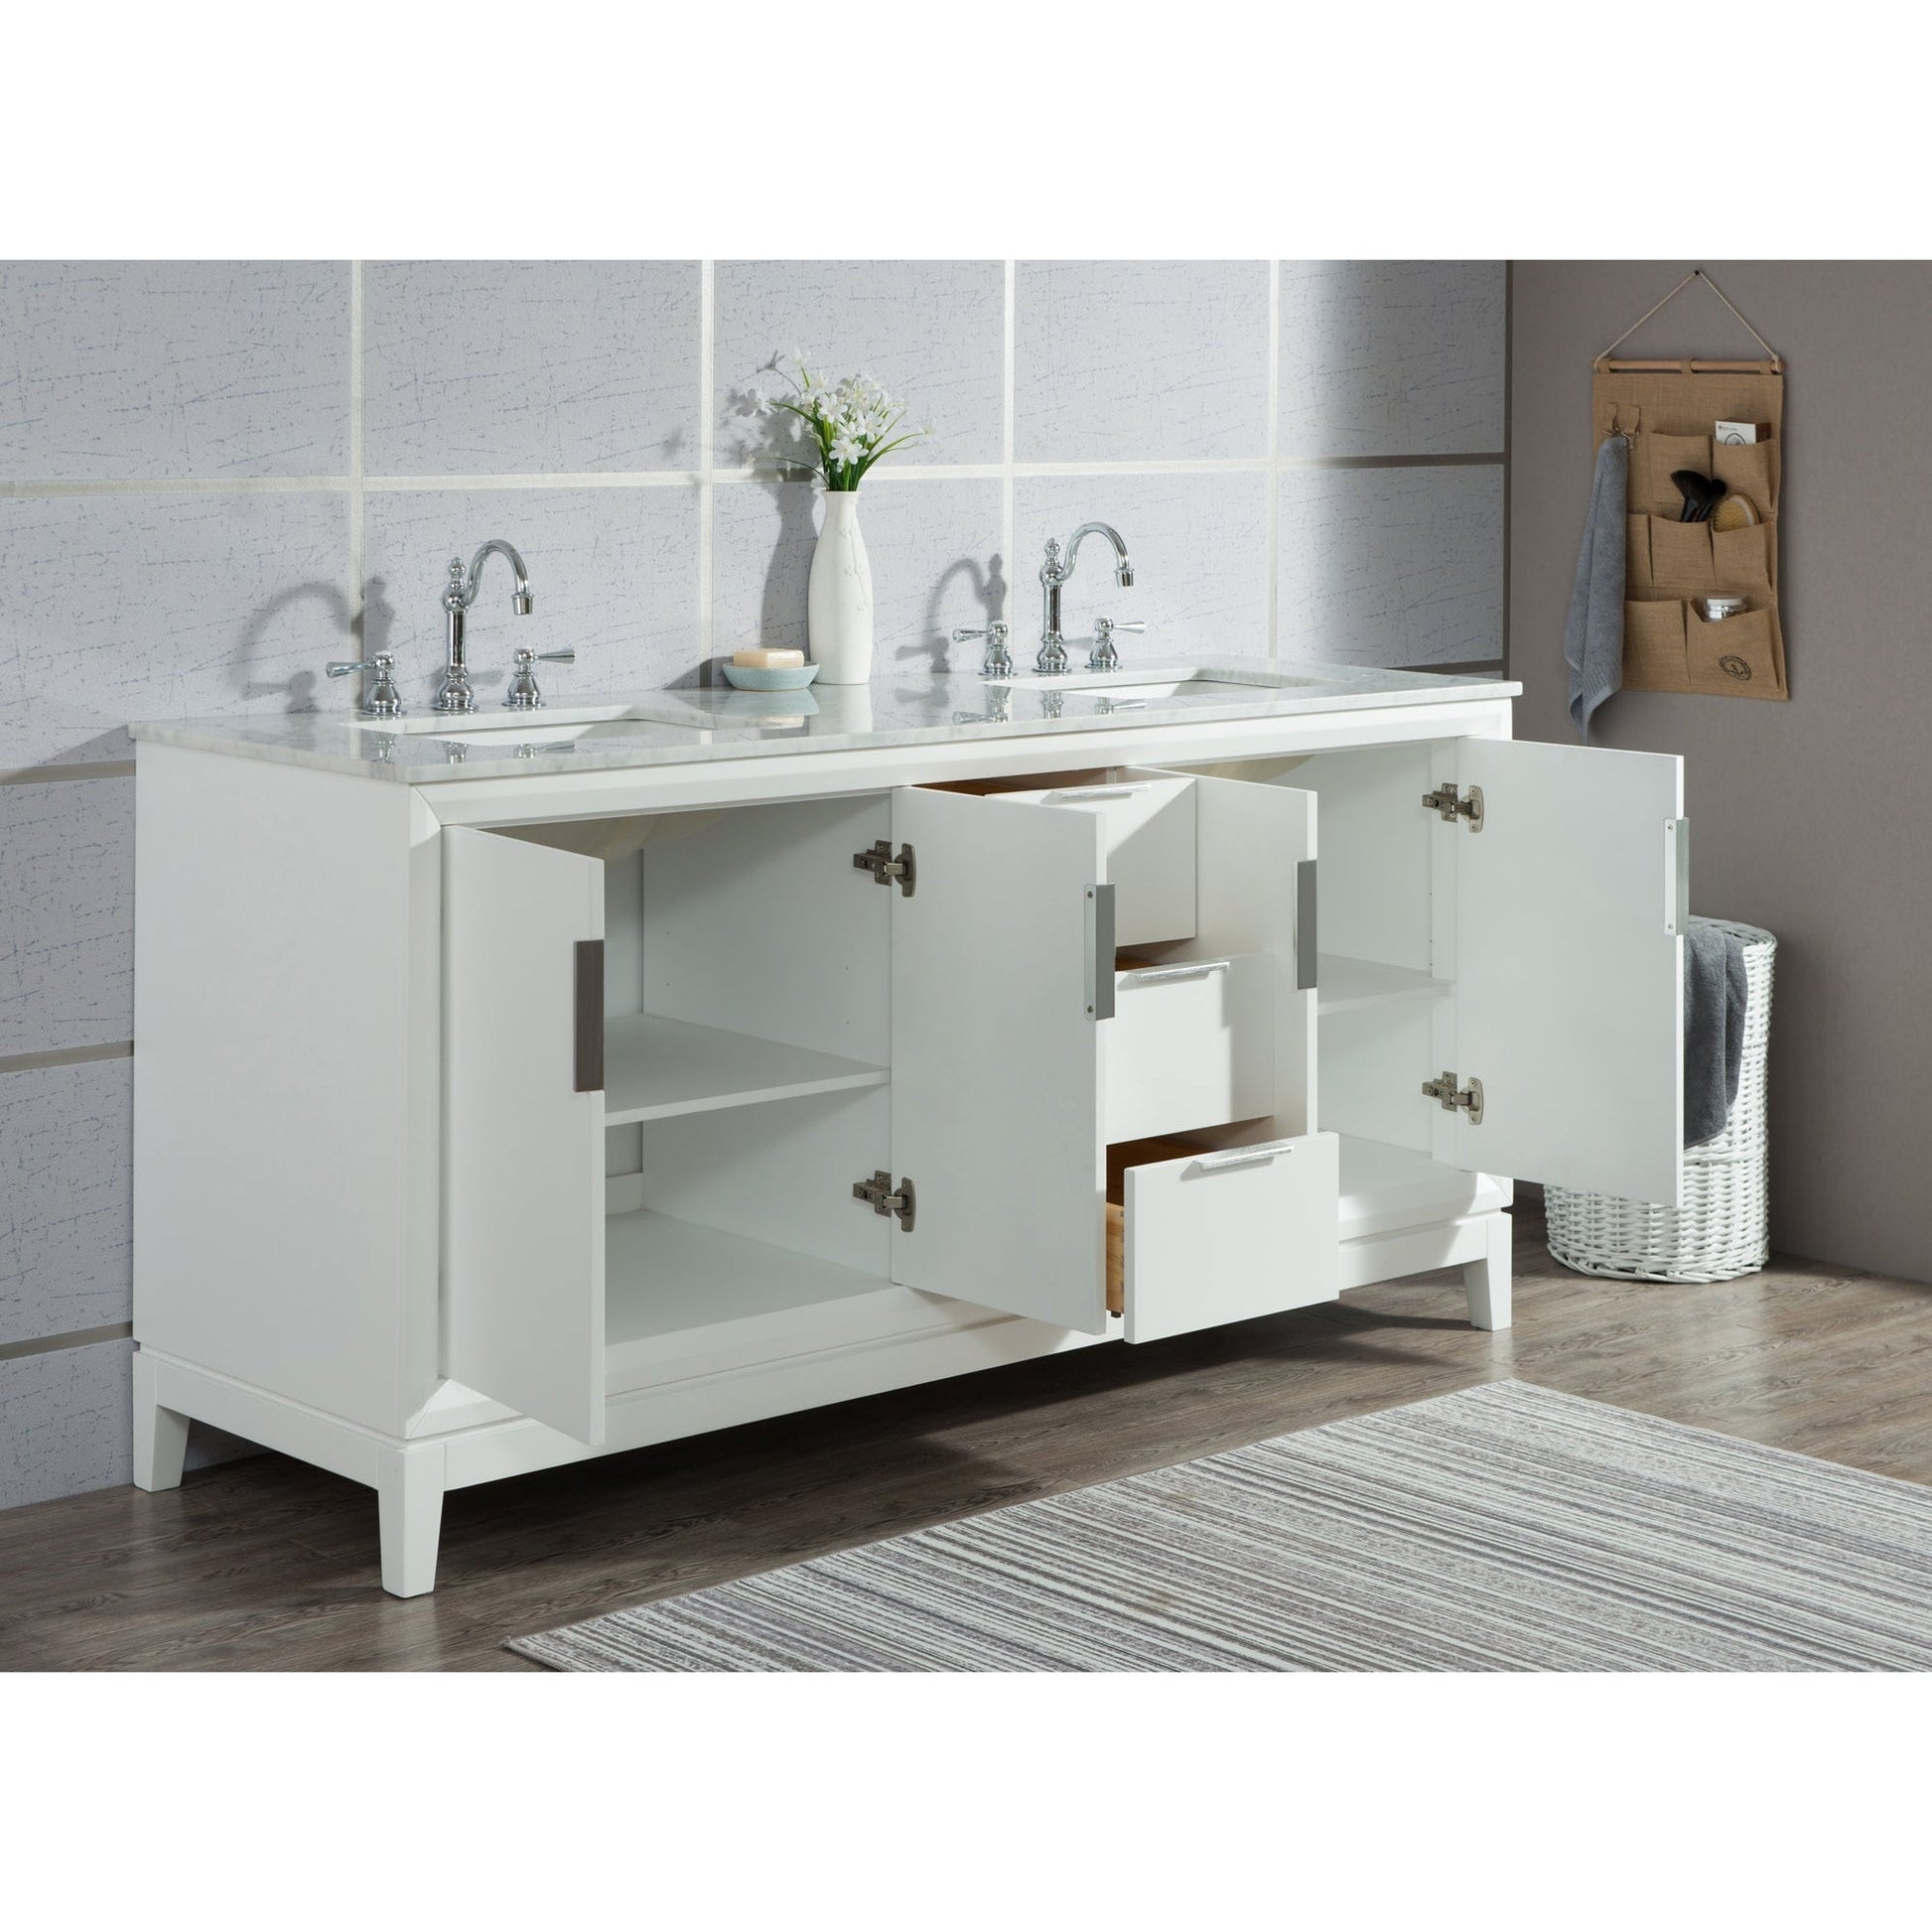 Water Creation Elizabeth 72" Double Sink Carrara White Marble Vanity In Pure White With Matching Mirror and F2-0012-01-TL Lavatory Faucet